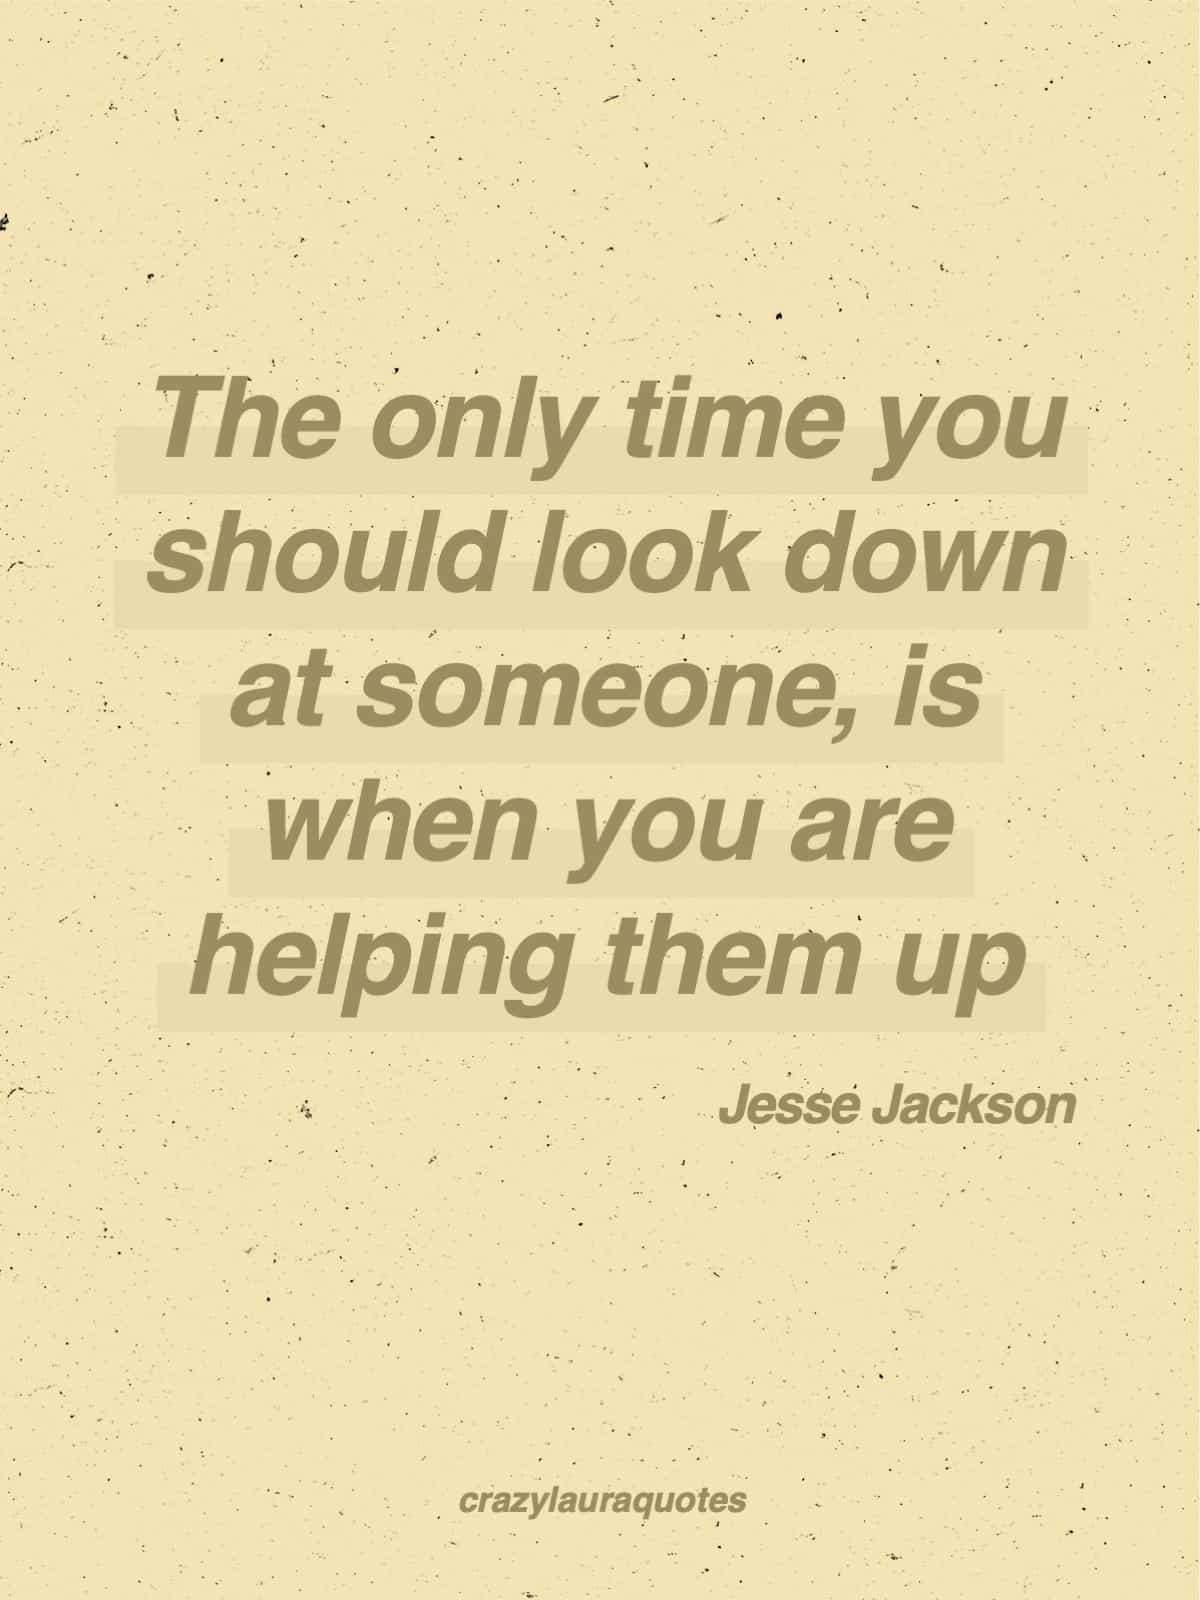 lifting other people up jesse jackson quote